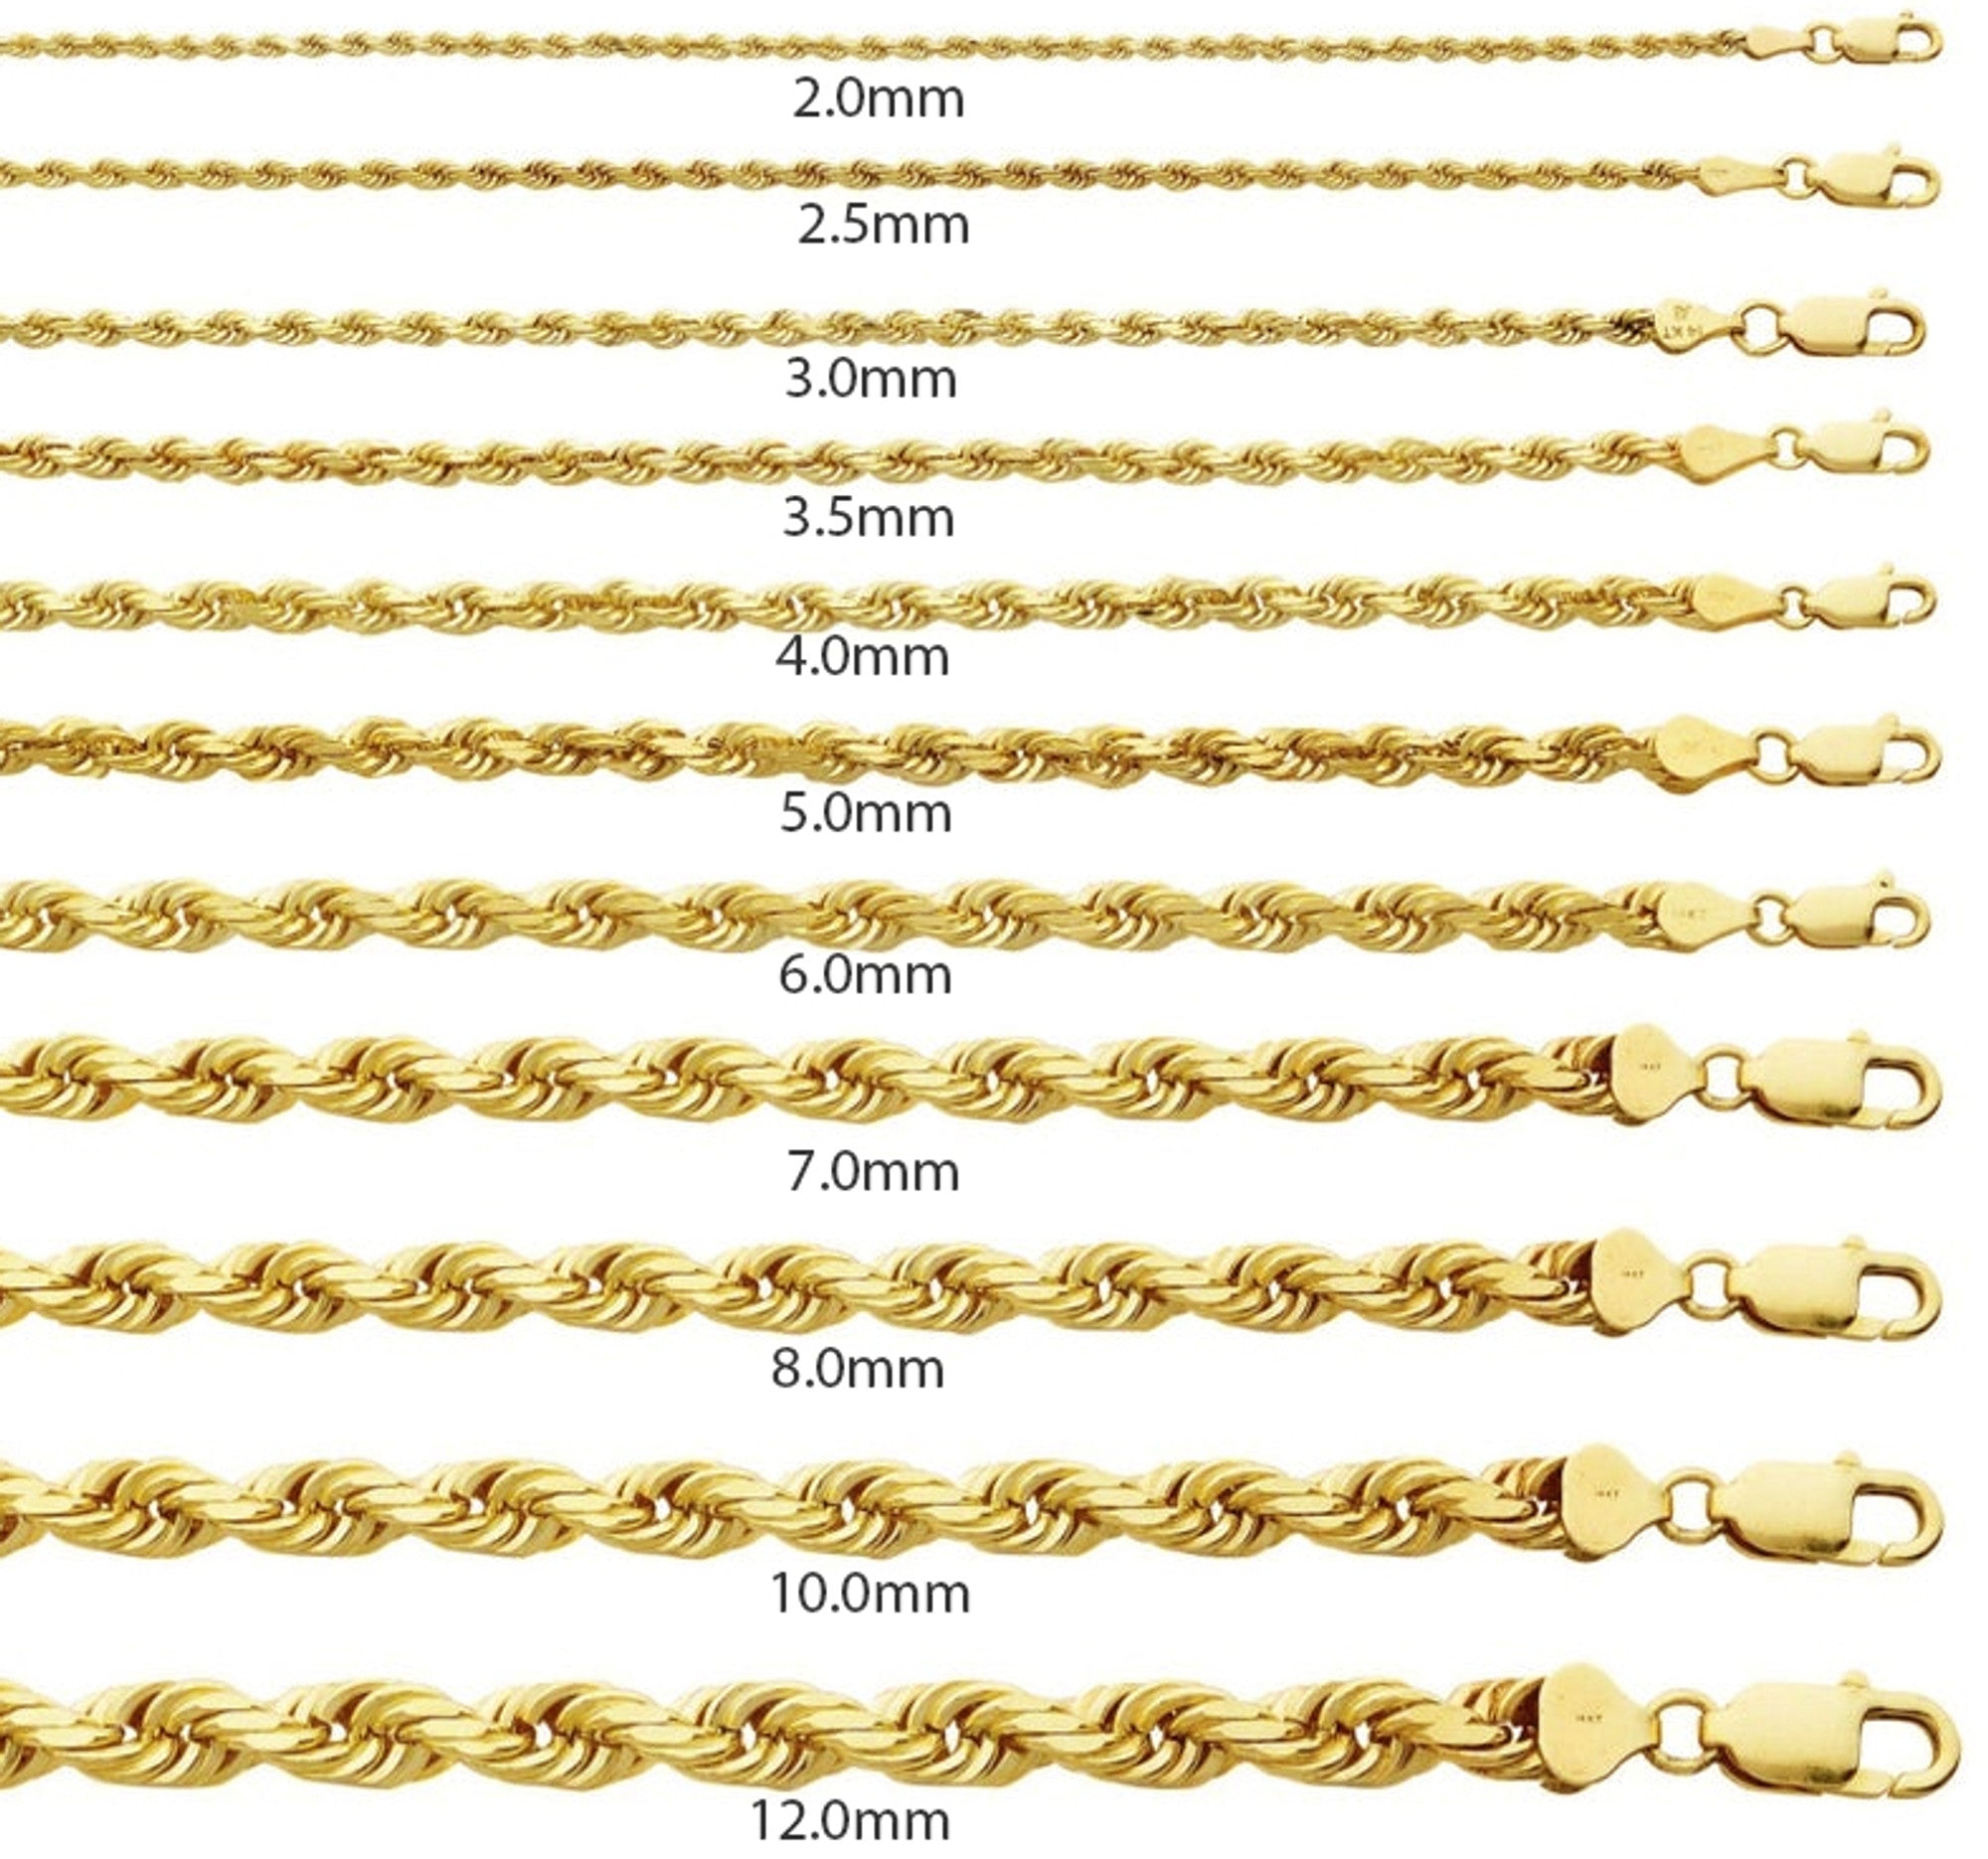 10kt Gold Hollow Rope Chain 4mm